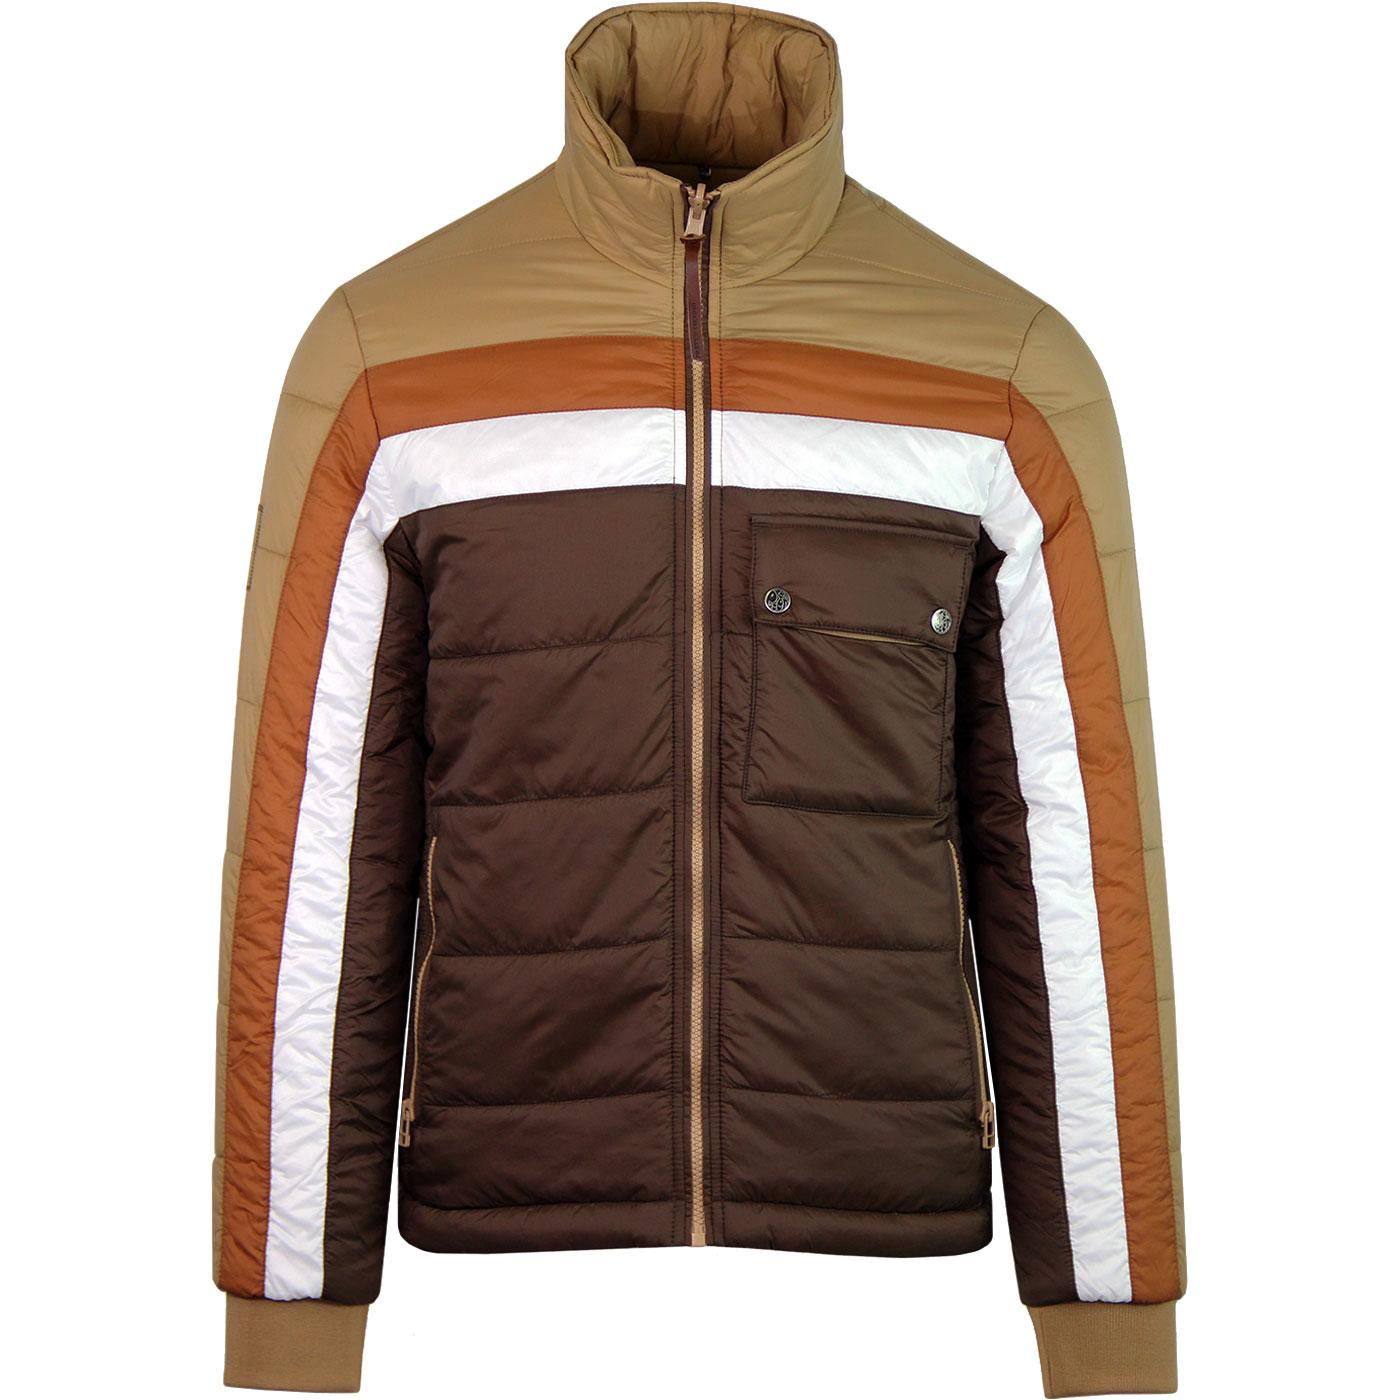 PRETTY GREEN Reversible Quilted Panel Jacket SAND